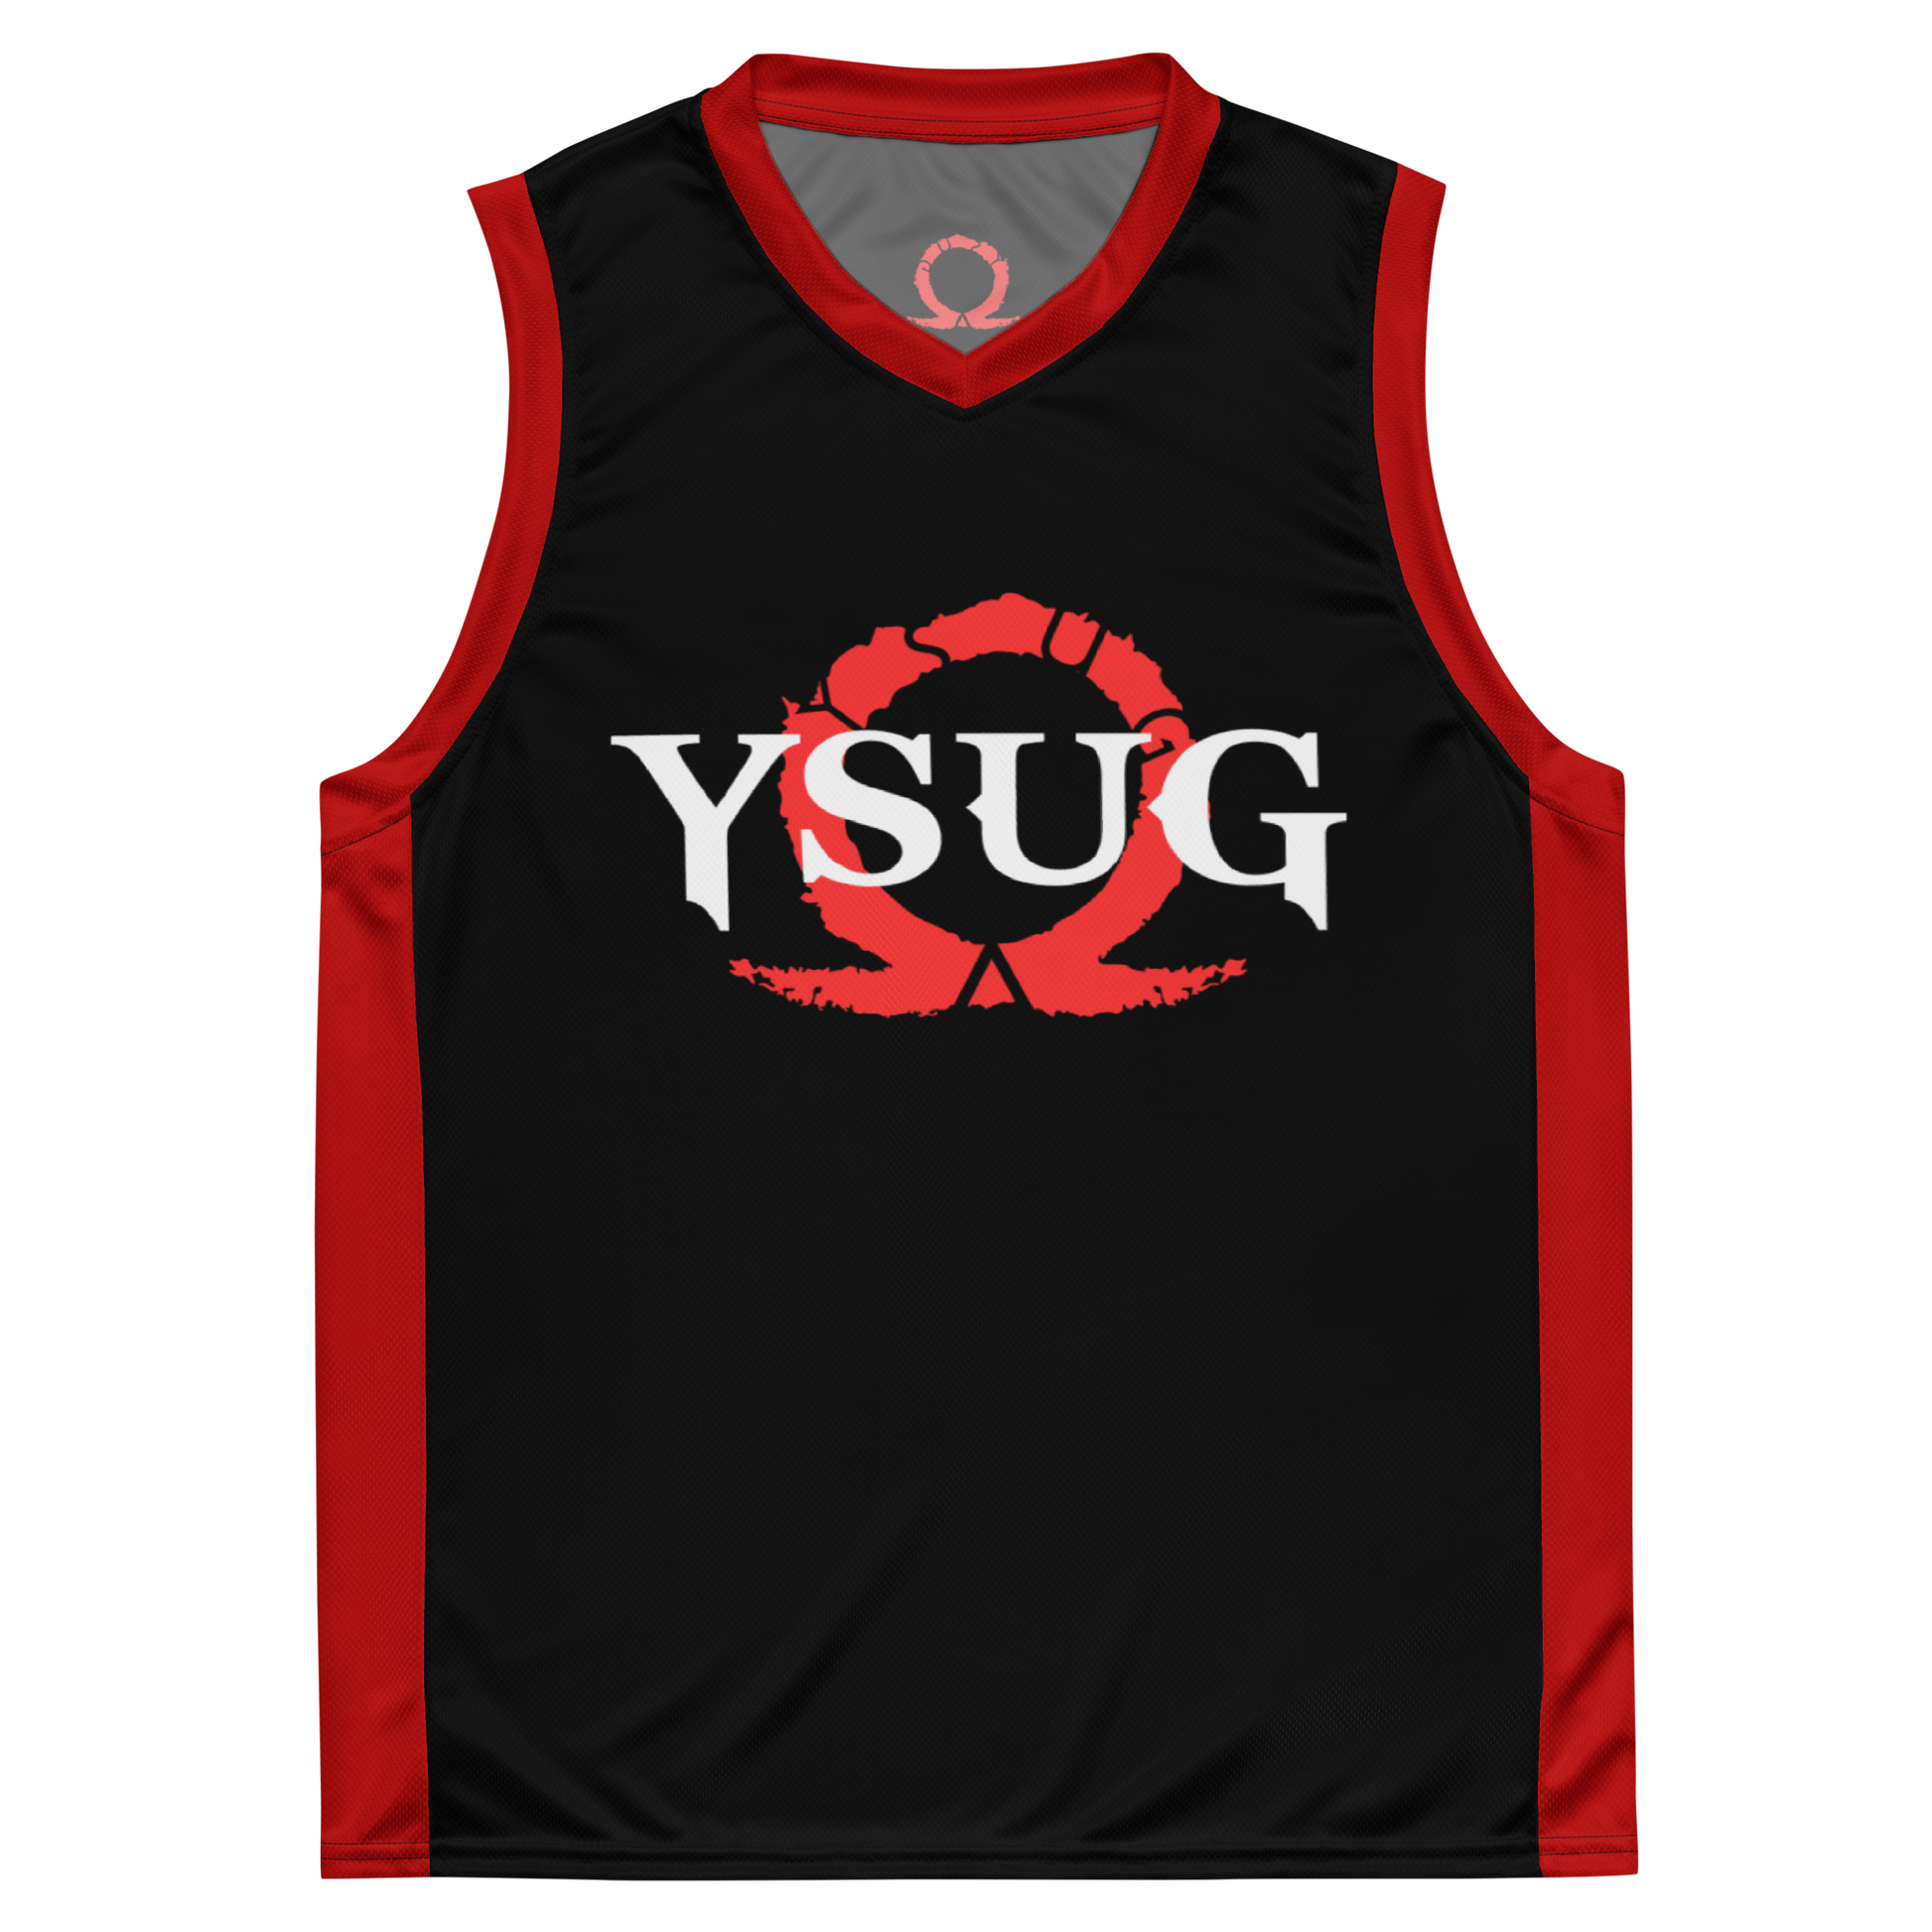 Sublimated Basketball Jerseys Astro